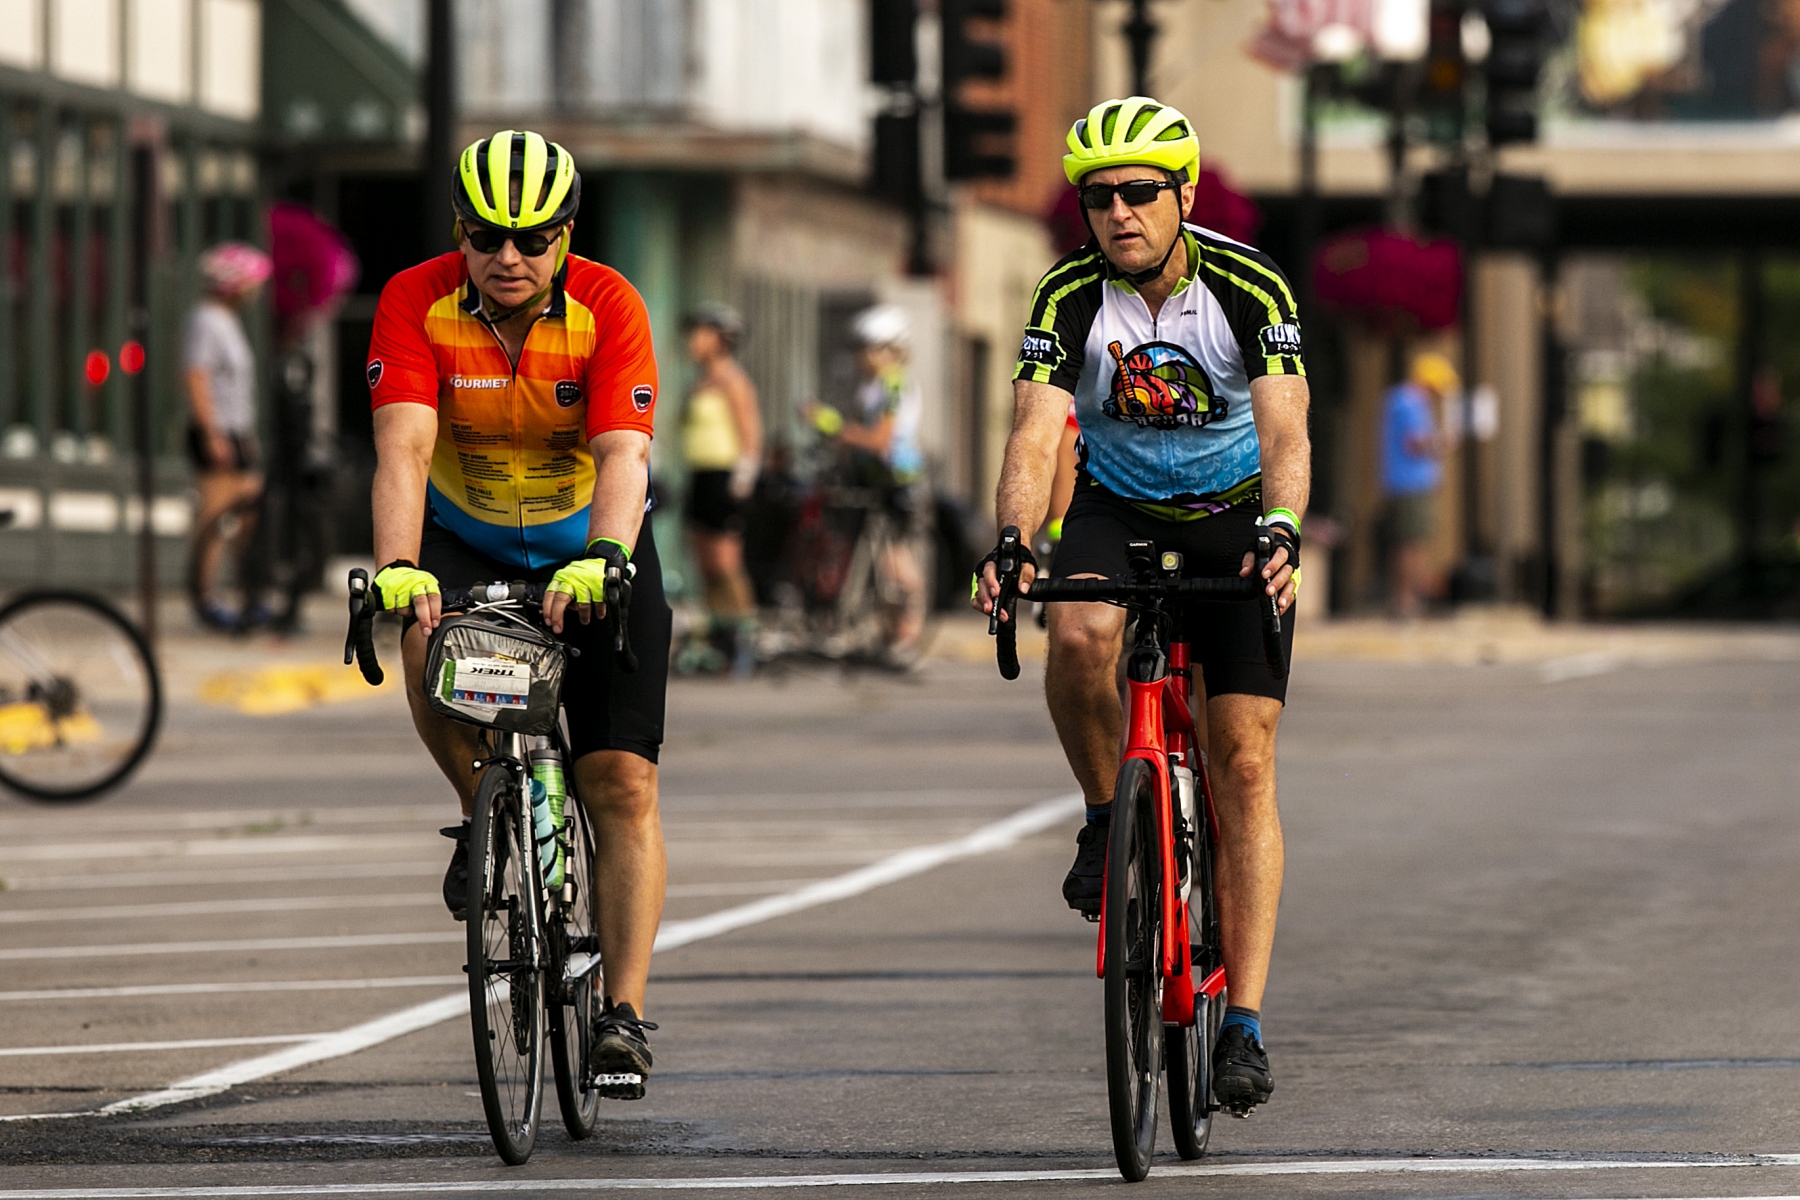 Cyclists ride out from their camps on Day 5 during RAGBRAI, Thursday, July 29, 2021, in Waterloo, Iowa.